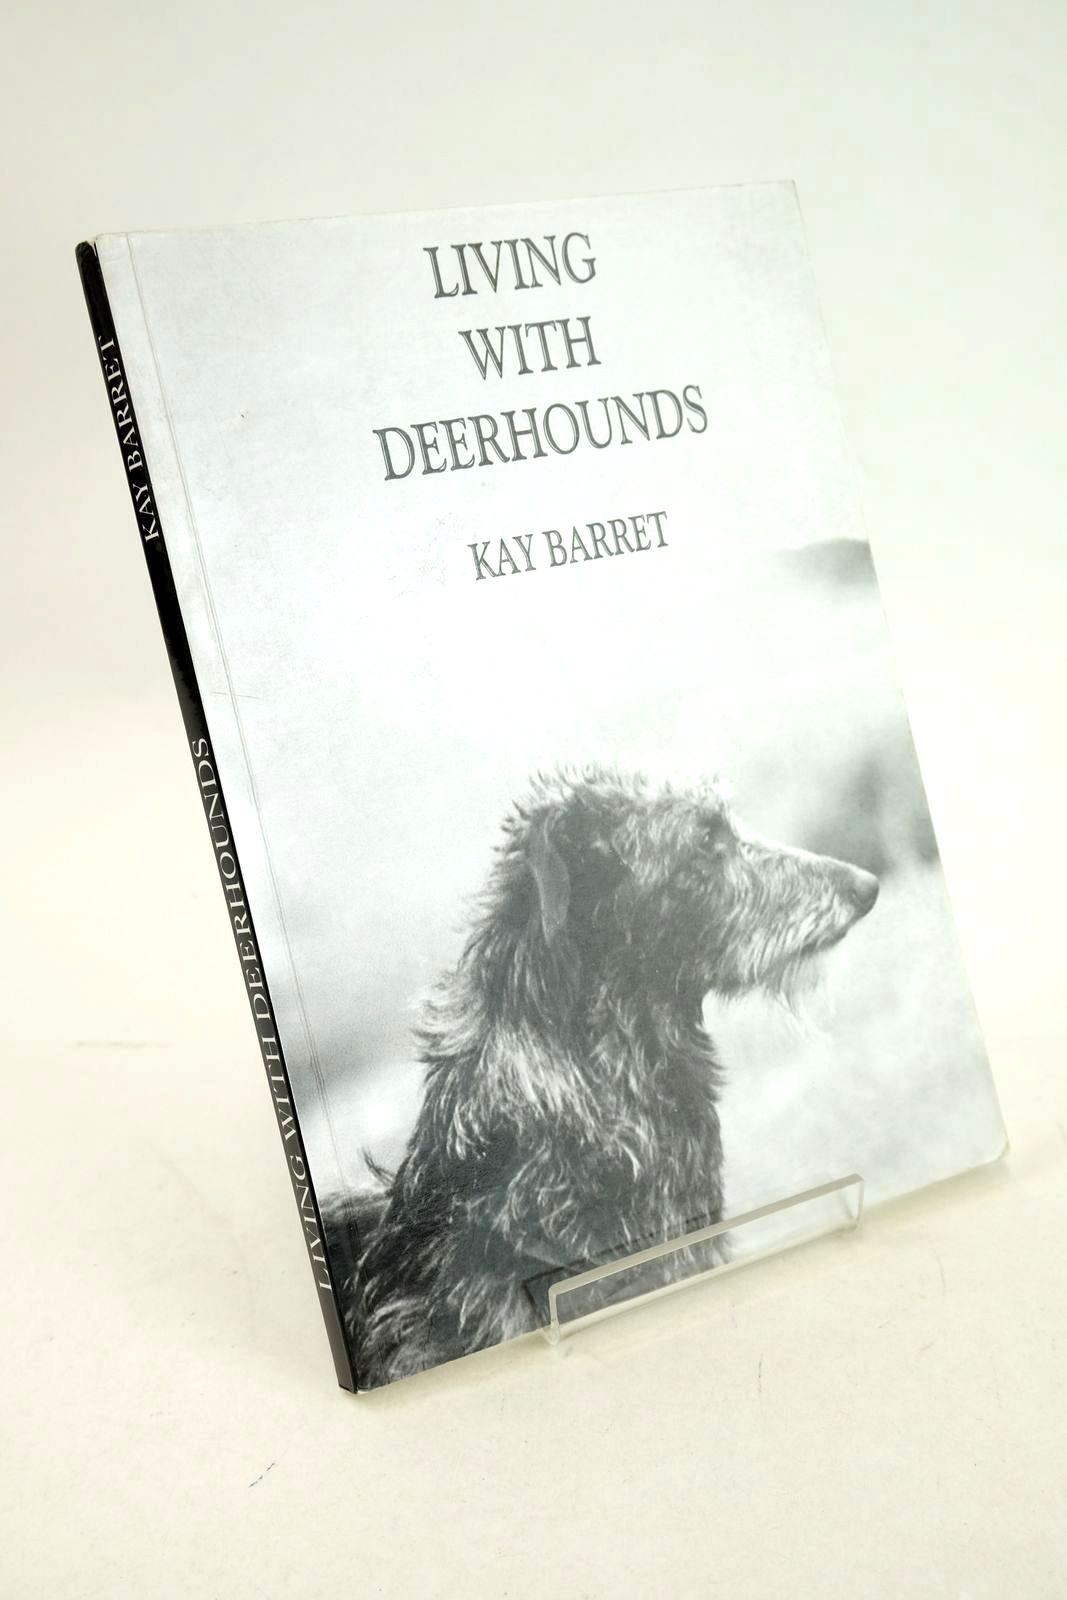 Photo of LIVING WITH DEERHOUNDS written by Barret, Kay published by Kay Barret (STOCK CODE: 1326744)  for sale by Stella & Rose's Books